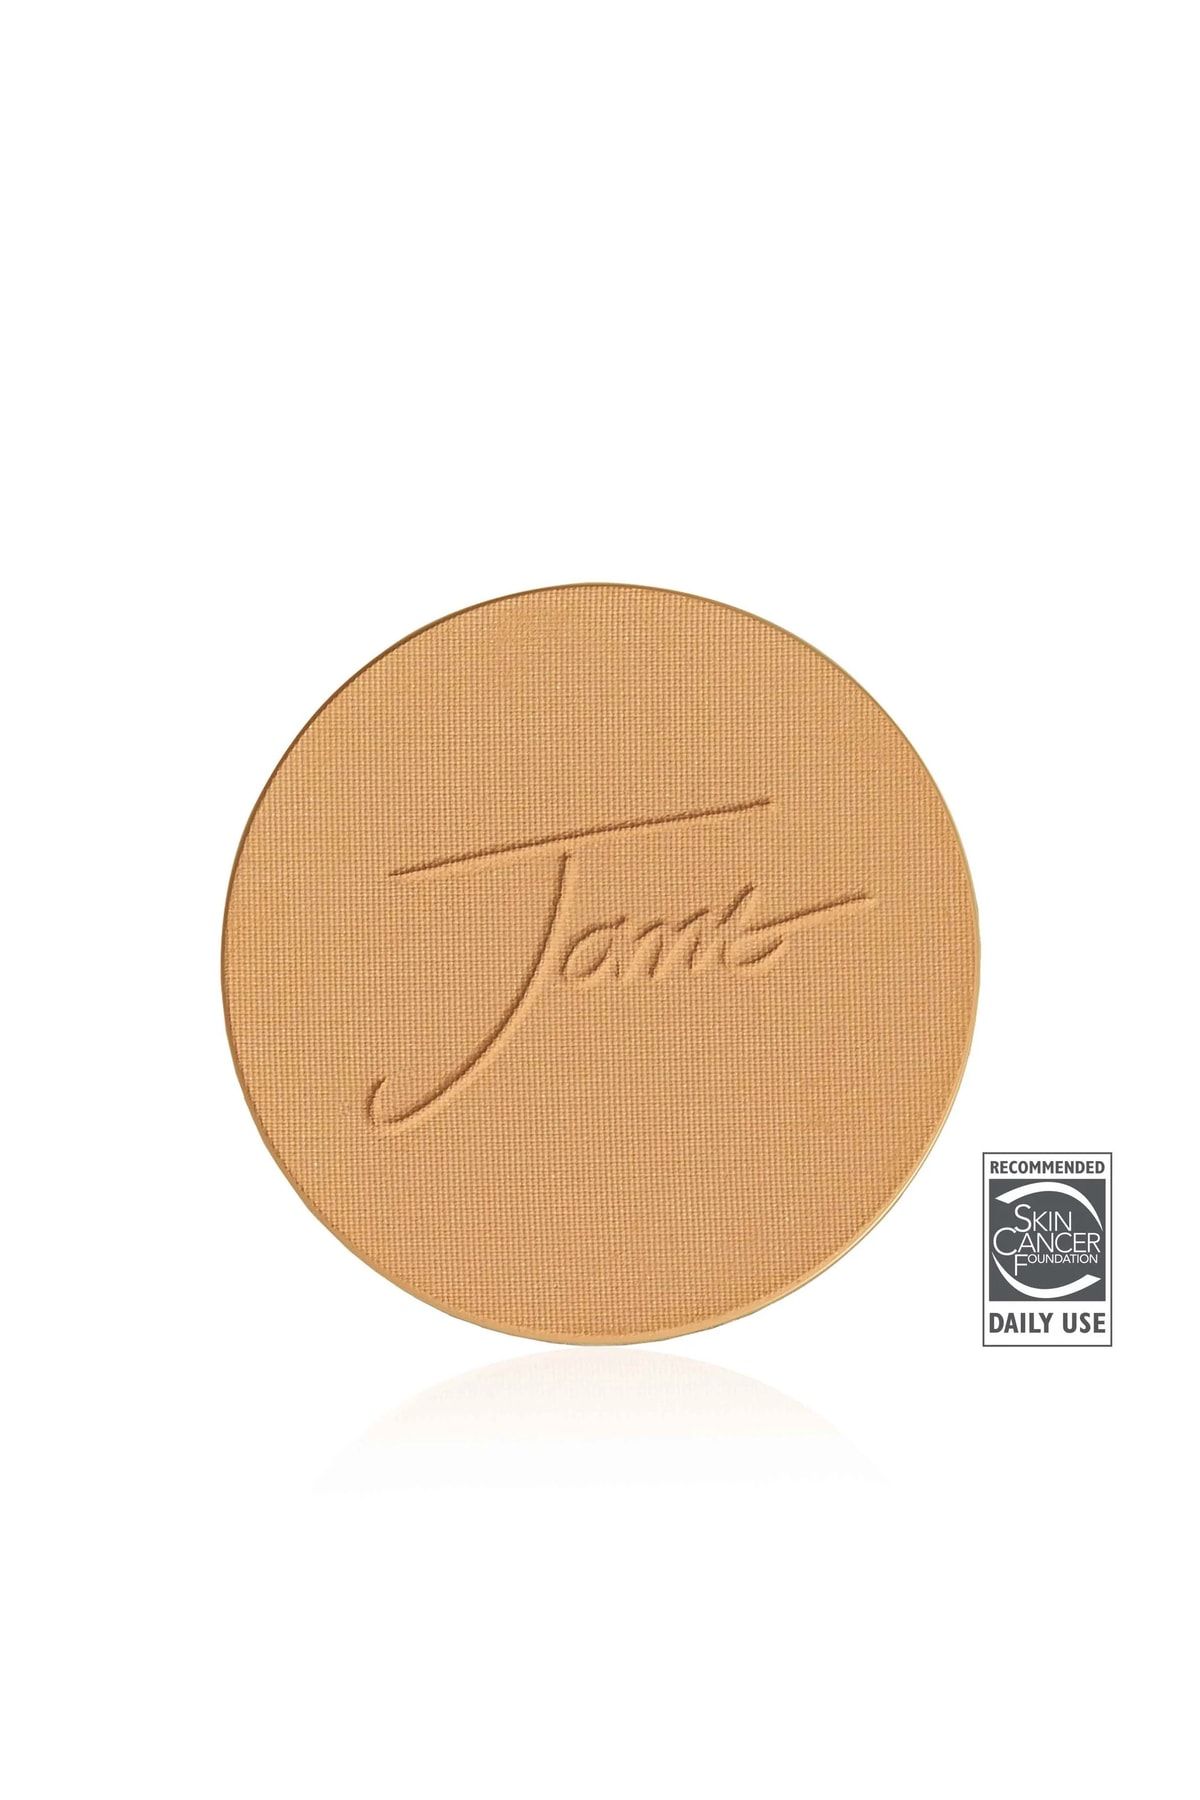 Jane Iredale Purepressed® Base Mineral Foundation Spf 20 Refill - Golden Tan